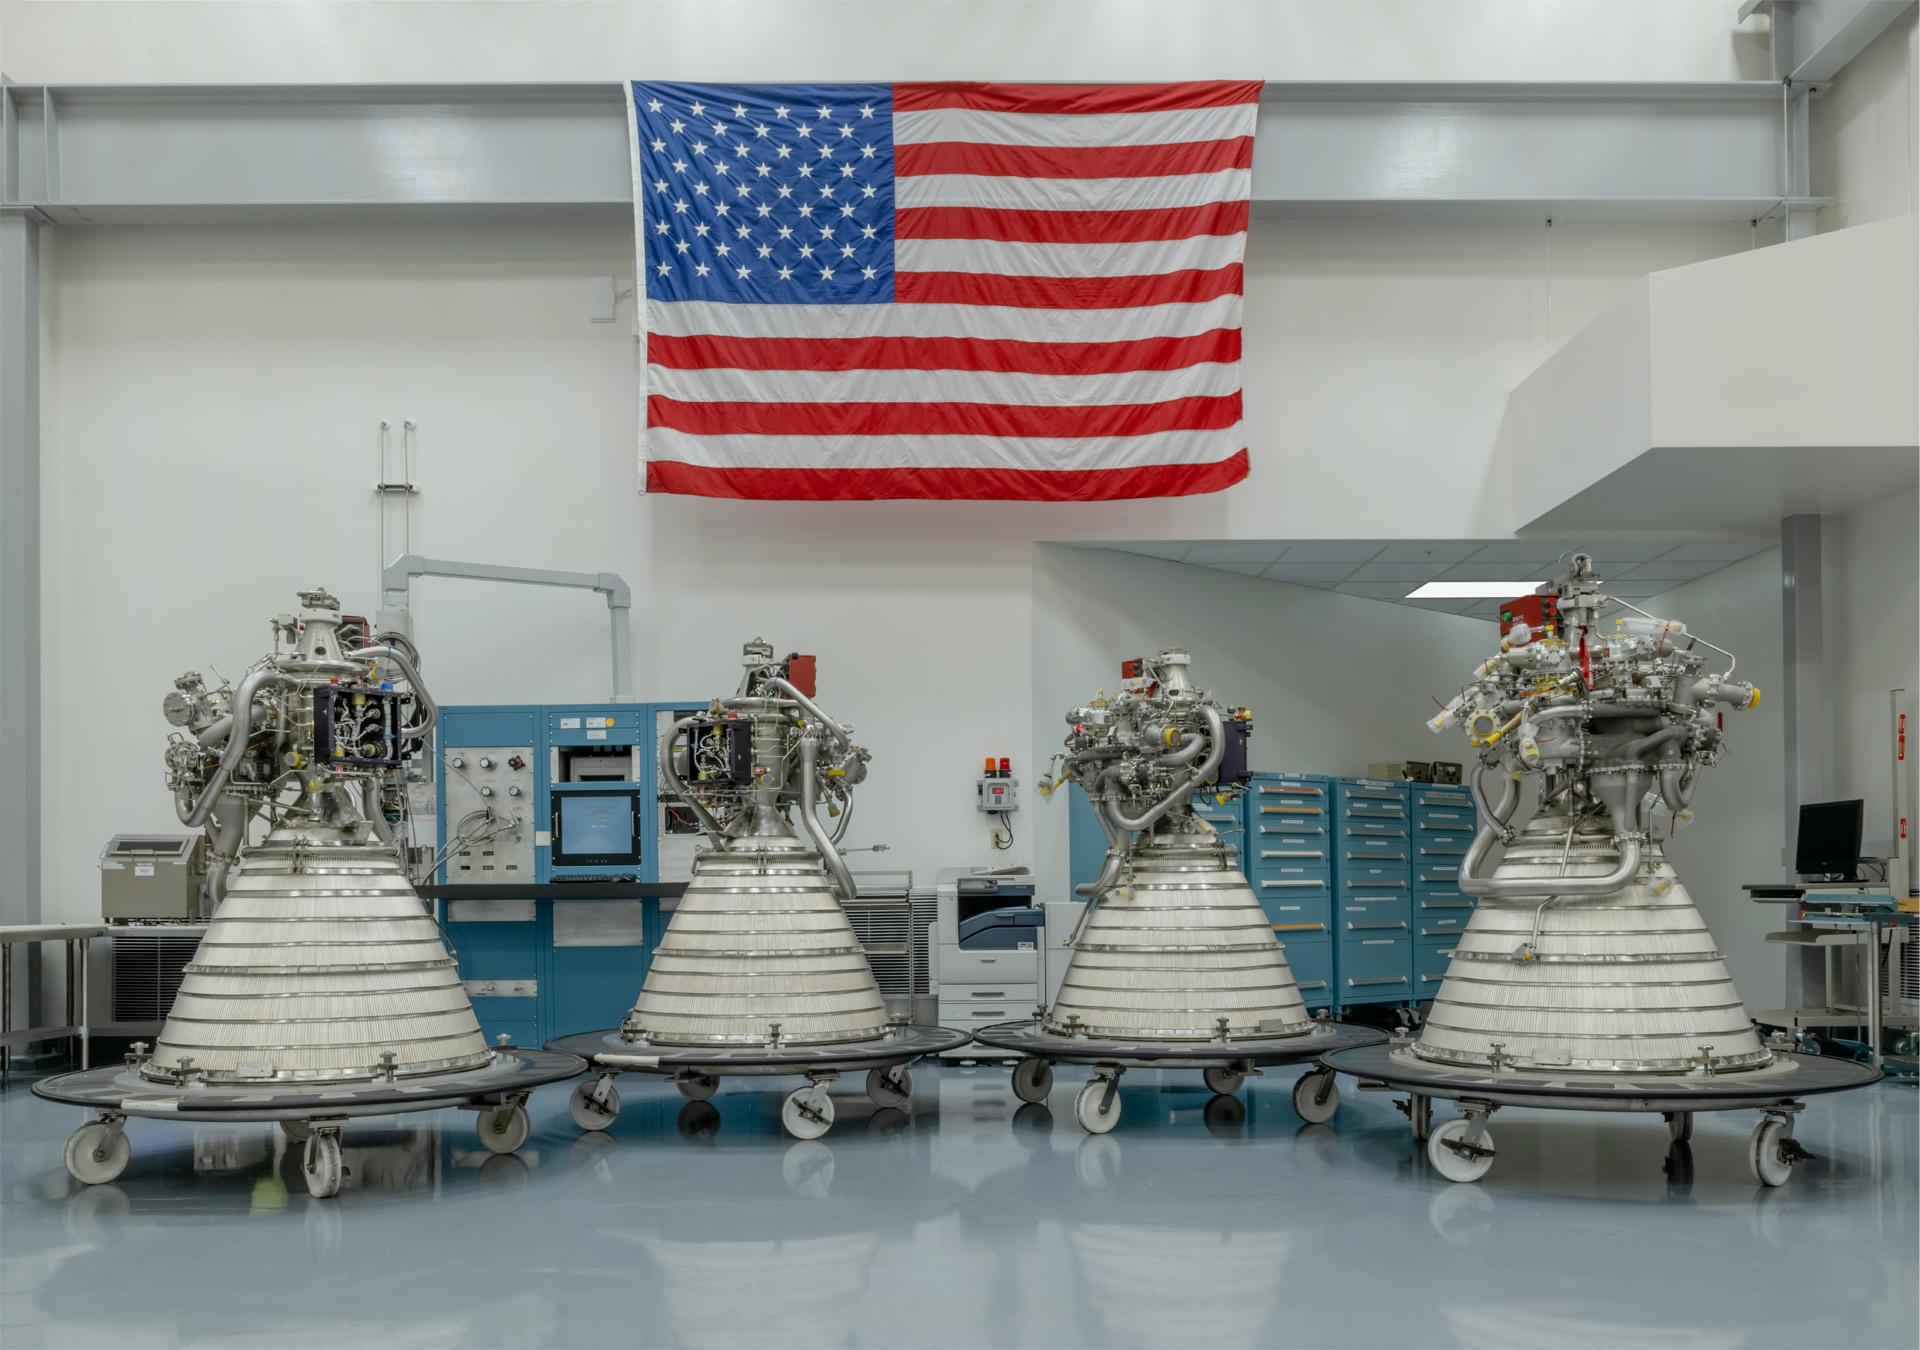 20200203_aerojet_rocketdyne_four_rl10c_3_engines_sized.jpg: Feb 03, 2020 - Four AR RL10 rocket engines - shown here at the copmany's facility in West Palm Beach, Florida - were recently delivered to NASA. Engines to help power SLS upper stage.